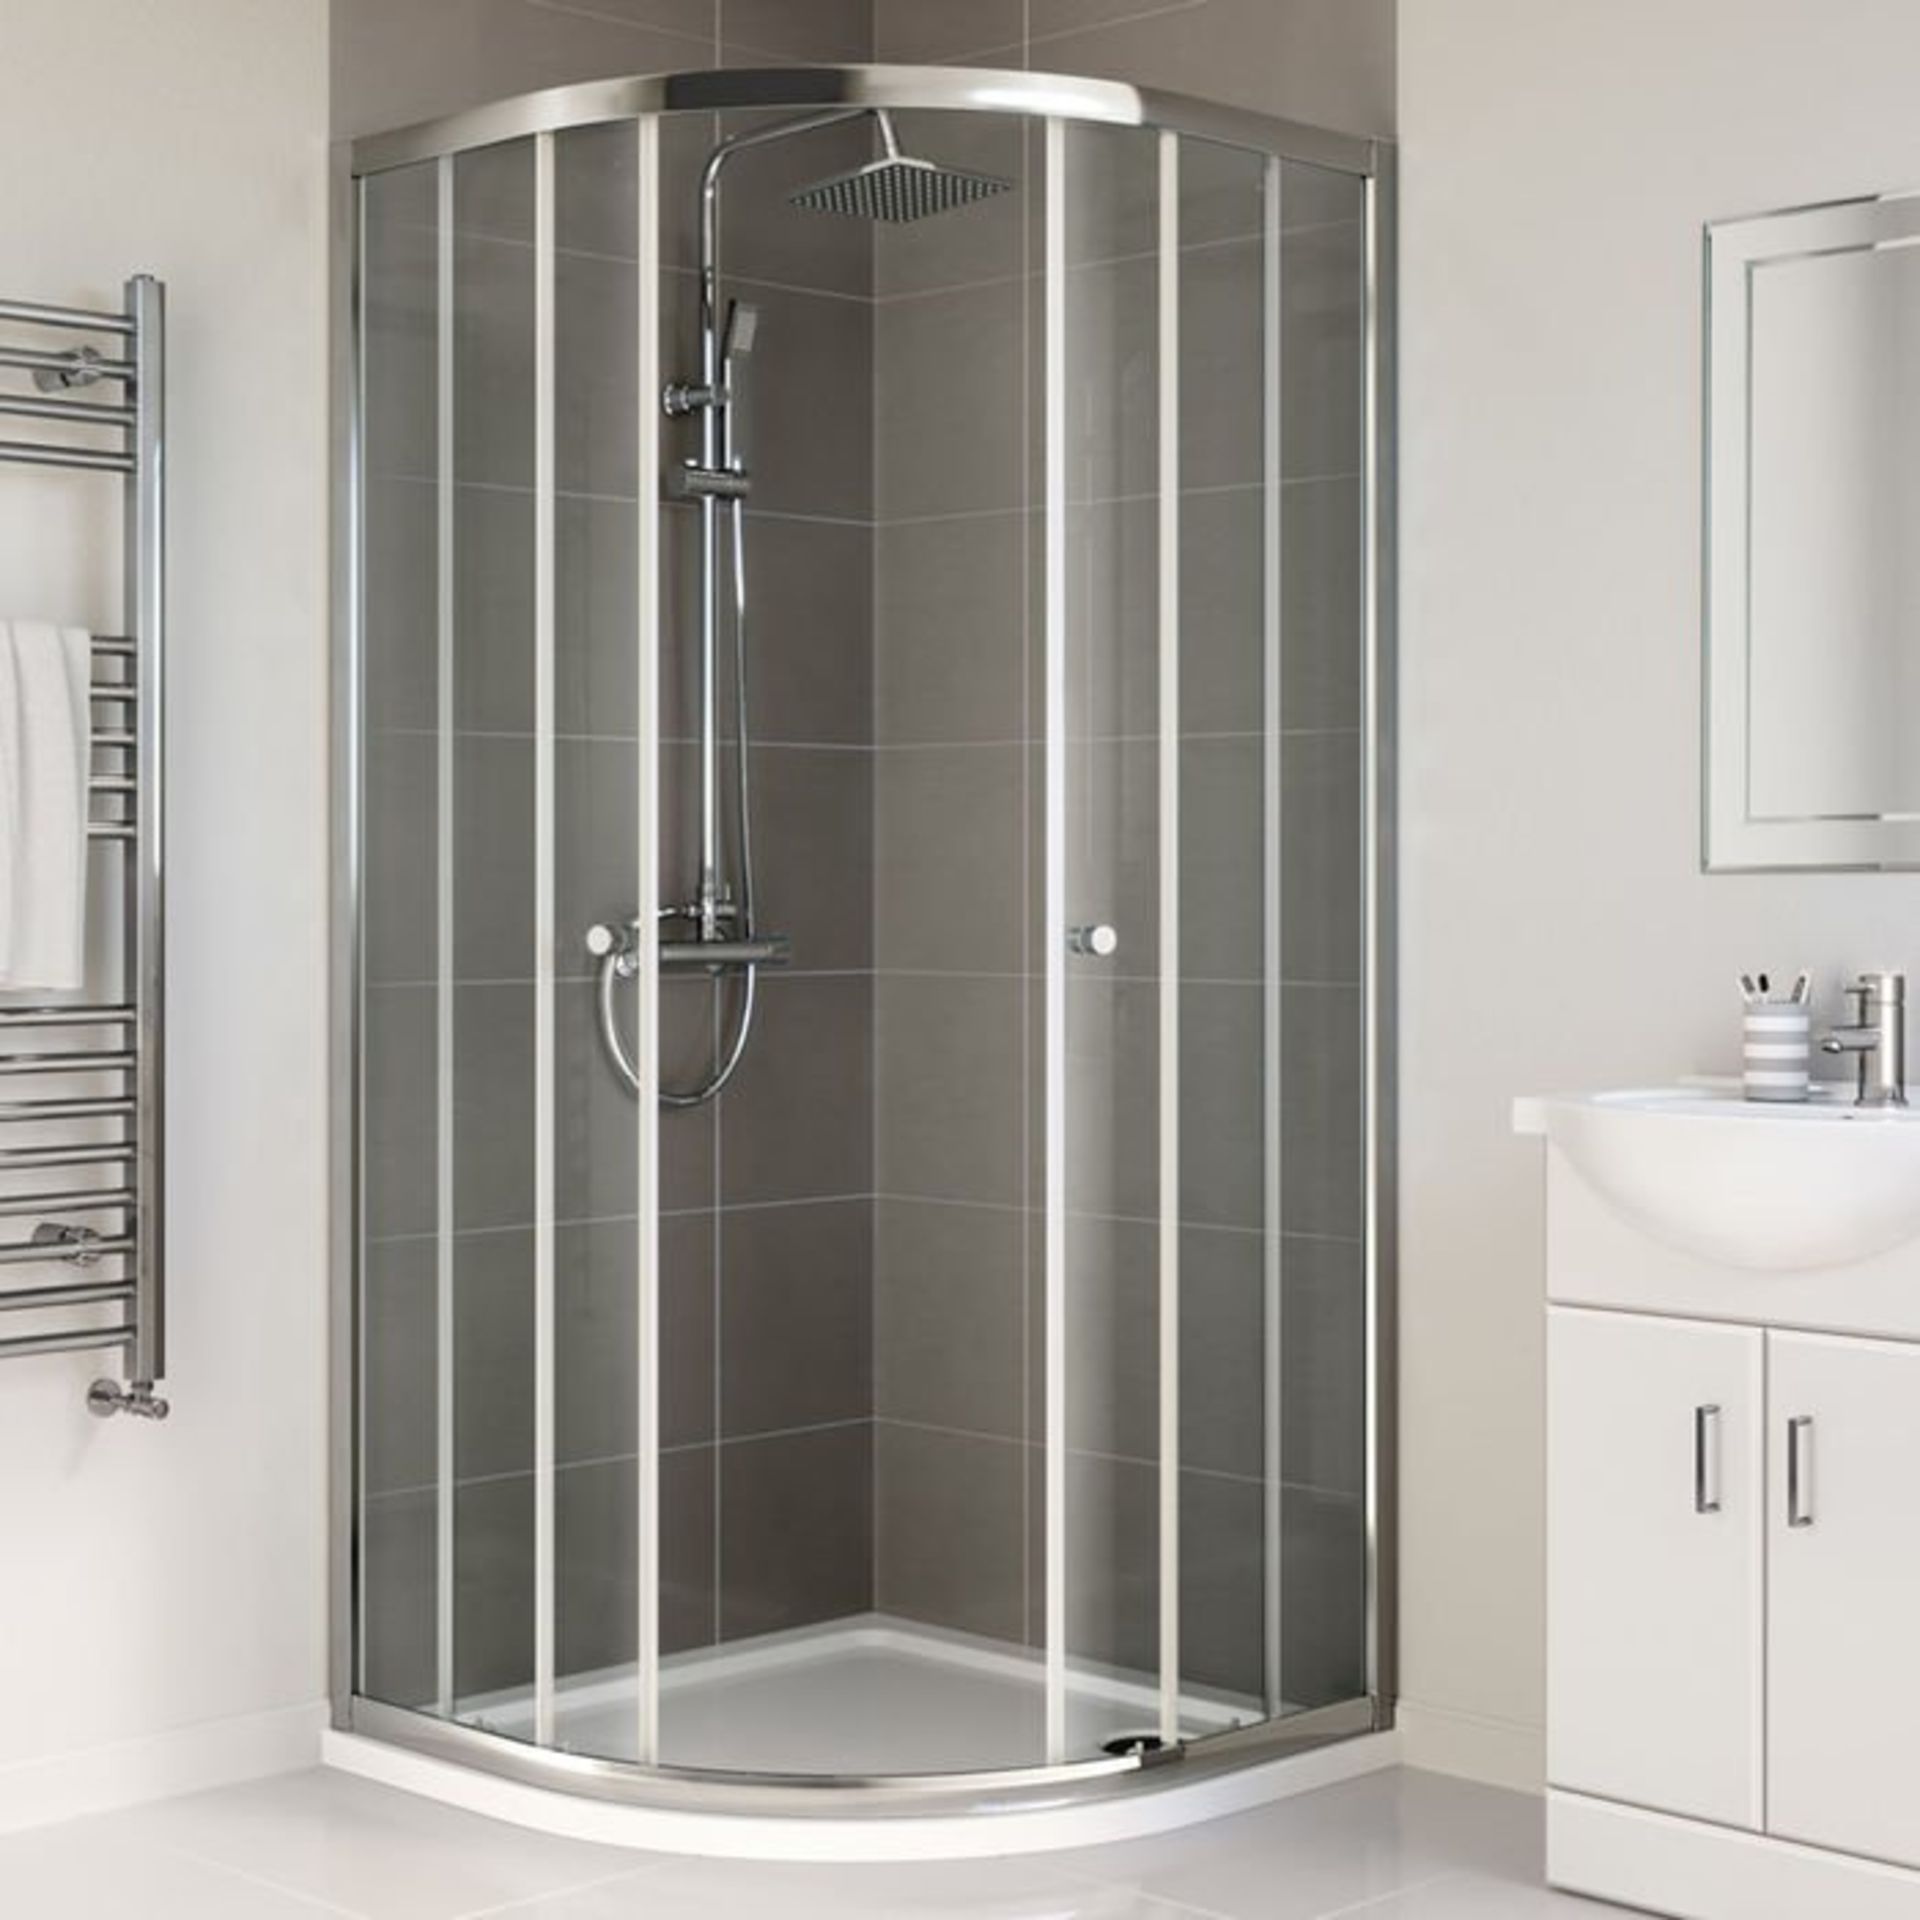 (G44) 800x800mm - Elements Quadrant Shower Enclosure RRP £199.99 4mm Safety Glass Fully waterproof - Image 2 of 6